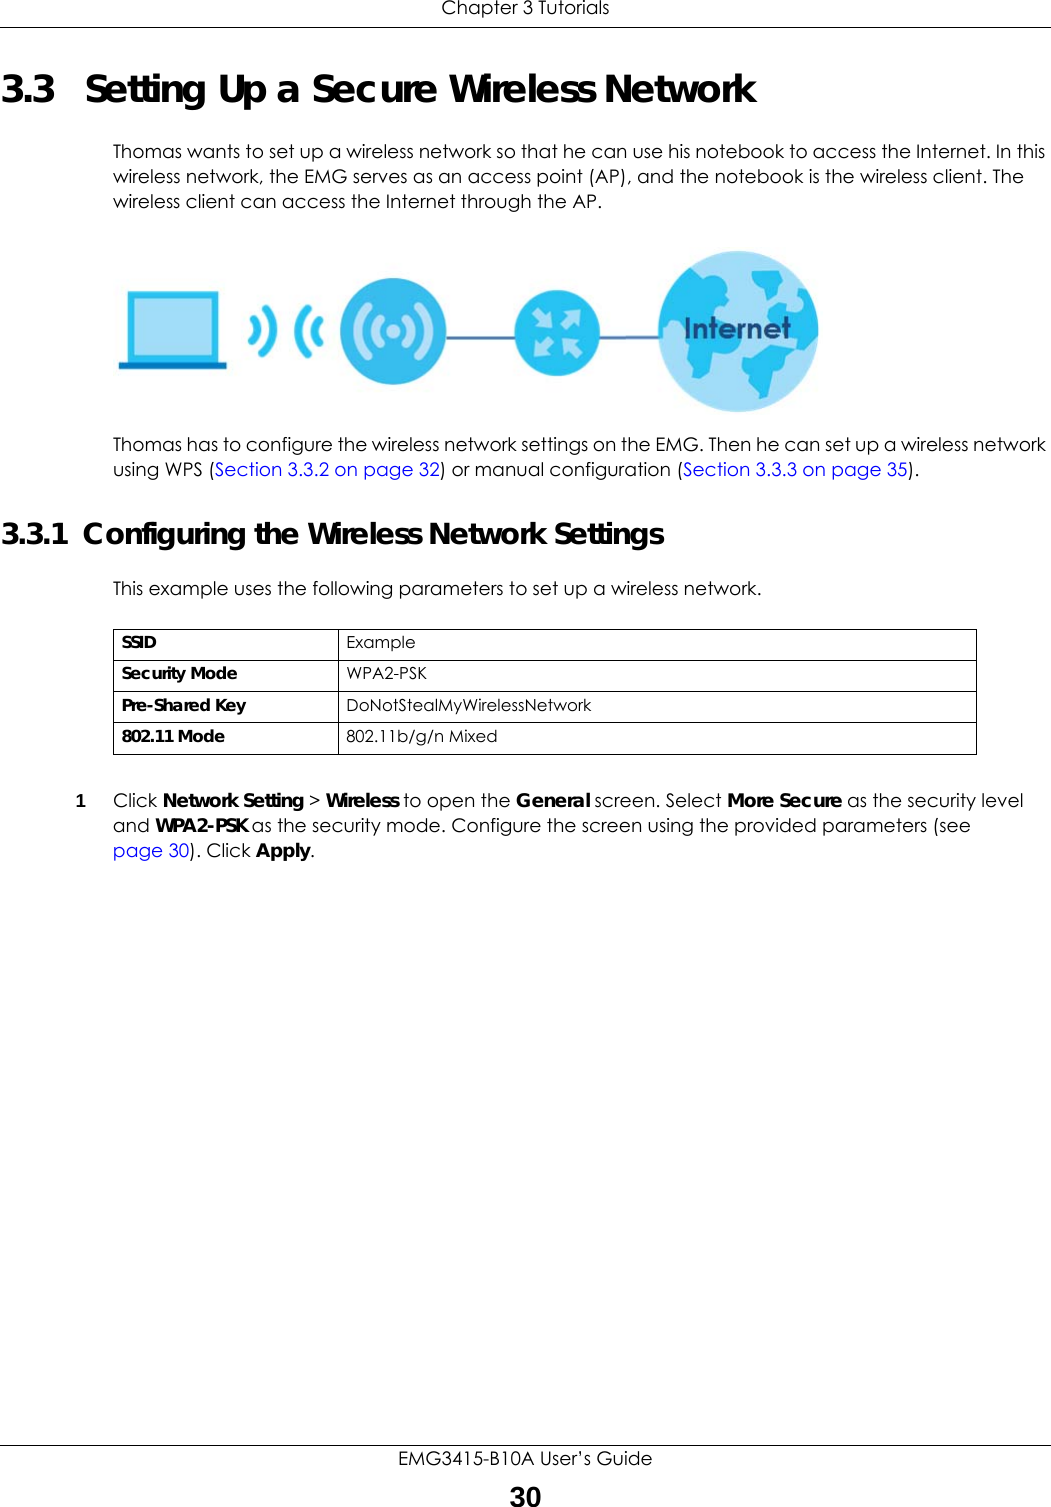 Chapter 3 TutorialsEMG3415-B10A User’s Guide303.3   Setting Up a Secure Wireless NetworkThomas wants to set up a wireless network so that he can use his notebook to access the Internet. In this wireless network, the EMG serves as an access point (AP), and the notebook is the wireless client. The wireless client can access the Internet through the AP.Thomas has to configure the wireless network settings on the EMG. Then he can set up a wireless network using WPS (Section 3.3.2 on page 32) or manual configuration (Section 3.3.3 on page 35).3.3.1  Configuring the Wireless Network SettingsThis example uses the following parameters to set up a wireless network.1Click Network Setting &gt; Wireless to open the General screen. Select More Secure as the security level and WPA2-PSK as the security mode. Configure the screen using the provided parameters (see page 30). Click Apply.SSID ExampleSecurity Mode WPA2-PSKPre-Shared Key DoNotStealMyWirelessNetwork802.11 Mode 802.11b/g/n Mixed